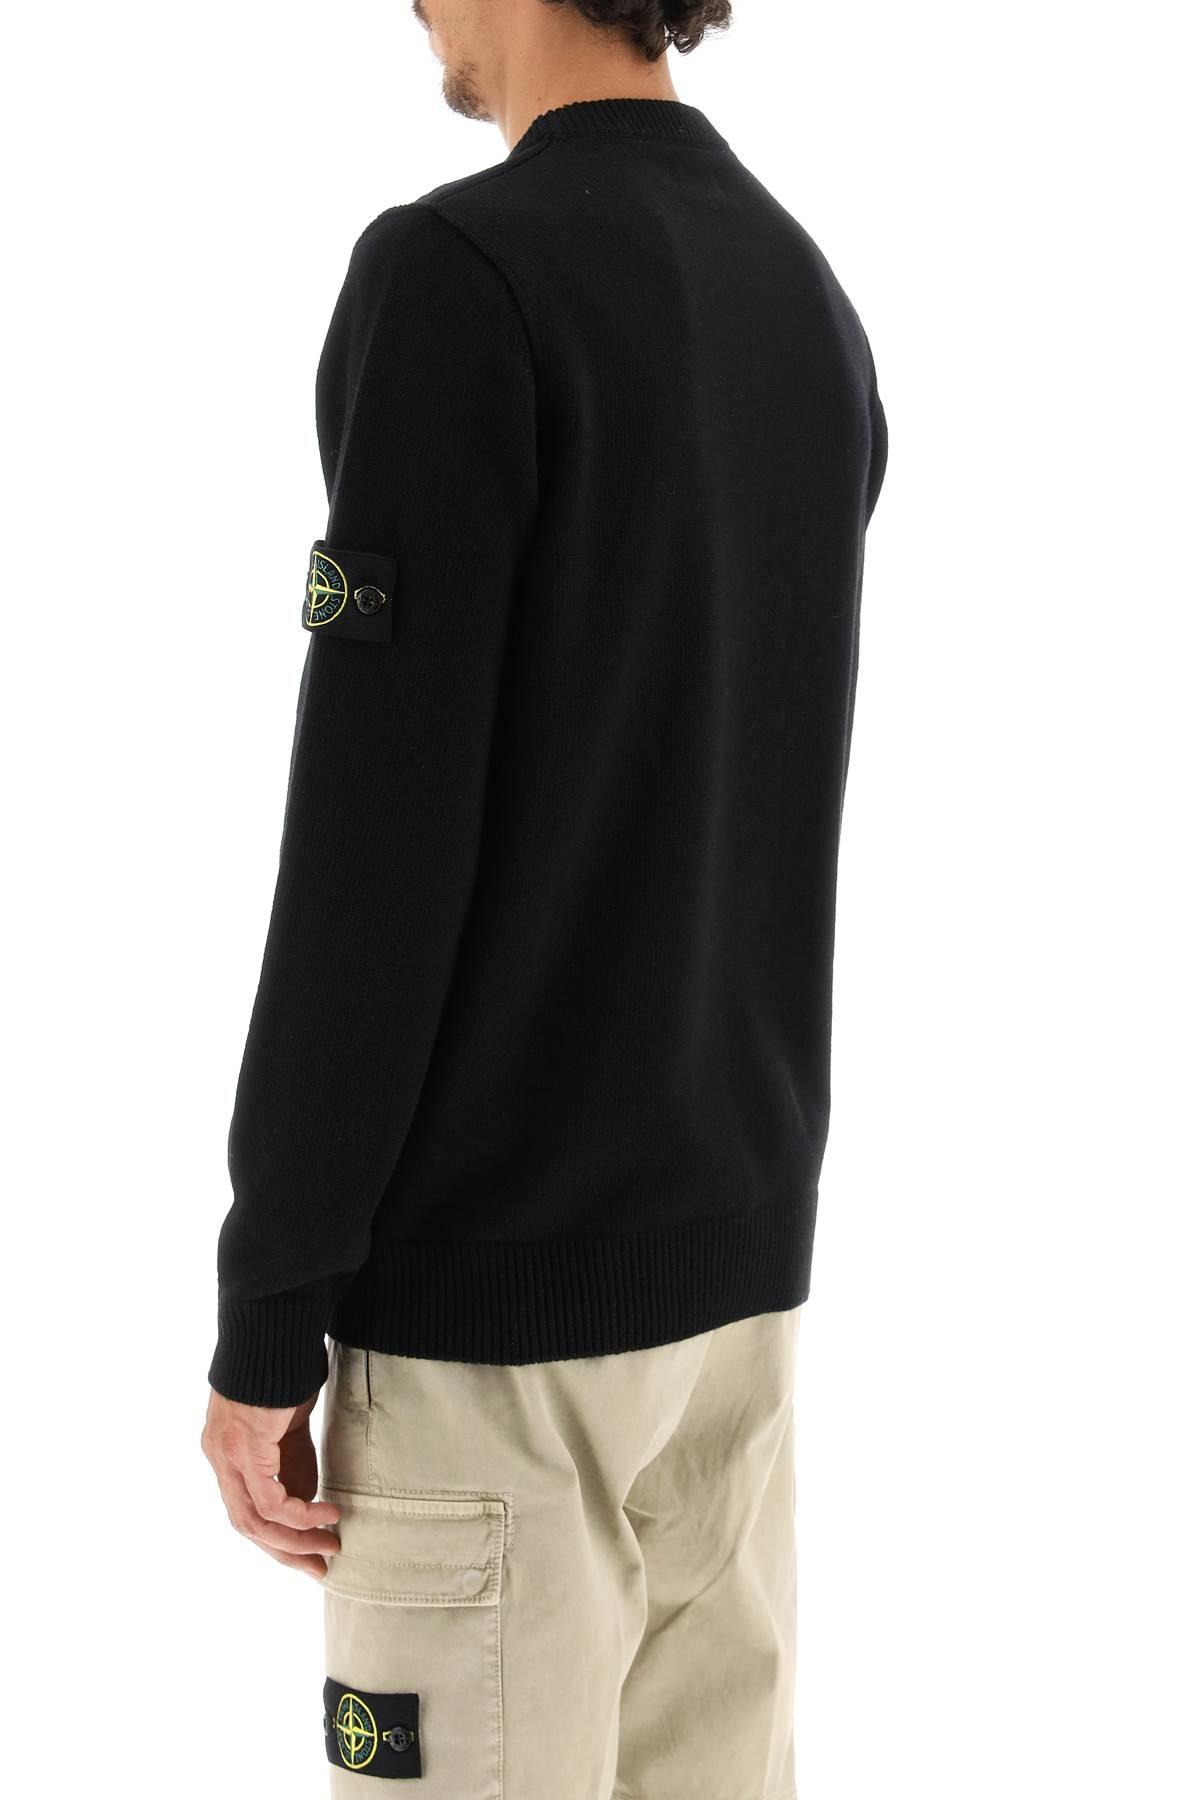 Stone Island Wool Blend Sweater With Logo Patch in Black for Men | Lyst